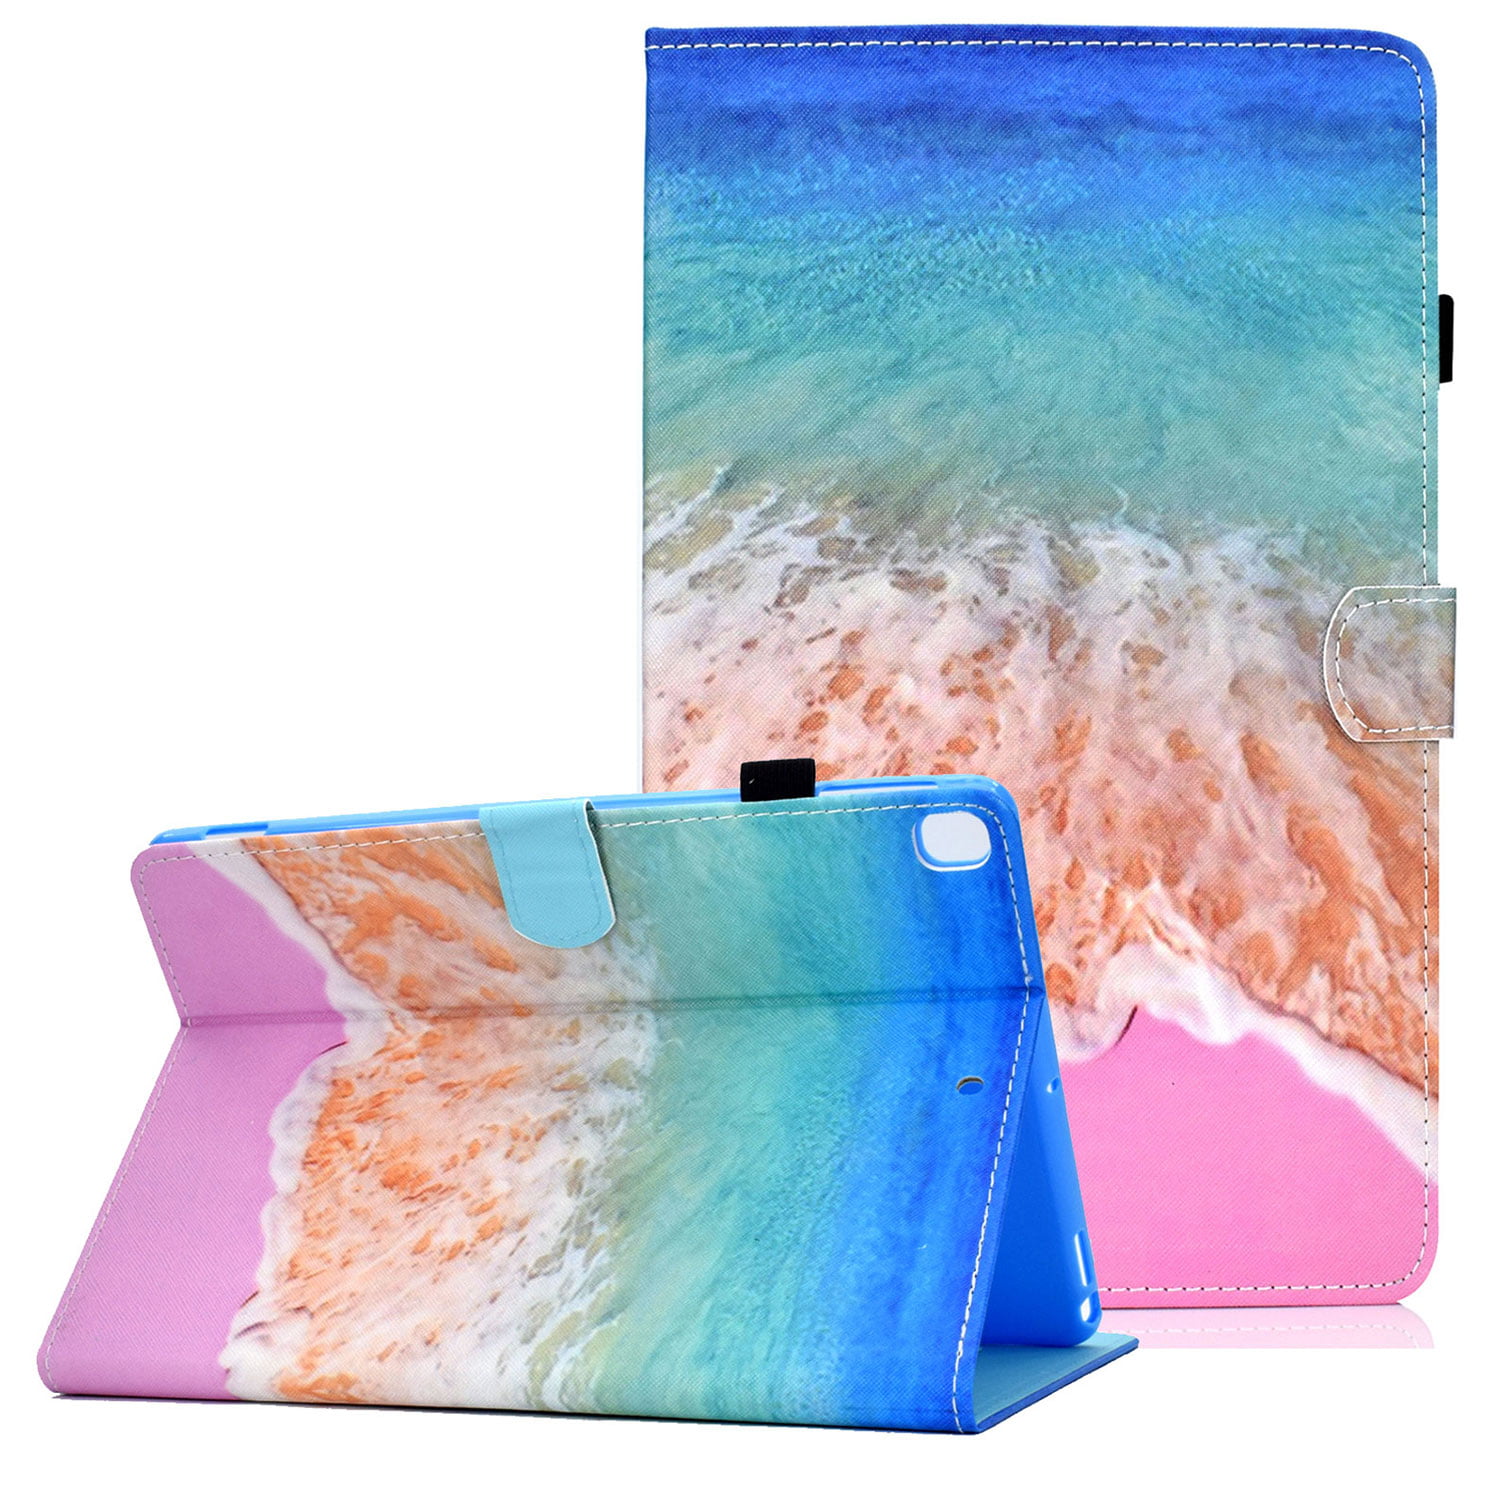 Overwinnen Gevoelig Psychologisch iPad 10.2" Case, iPad 7th Generation Case (A2197 /A2198 /A2200), Allytech  Slim Fit PU Leather Kickstand Folio Smart Cover Auto Sleep Wake Shockproof  TPU Cover Case for Apple iPad 10.2",Pink Beach -